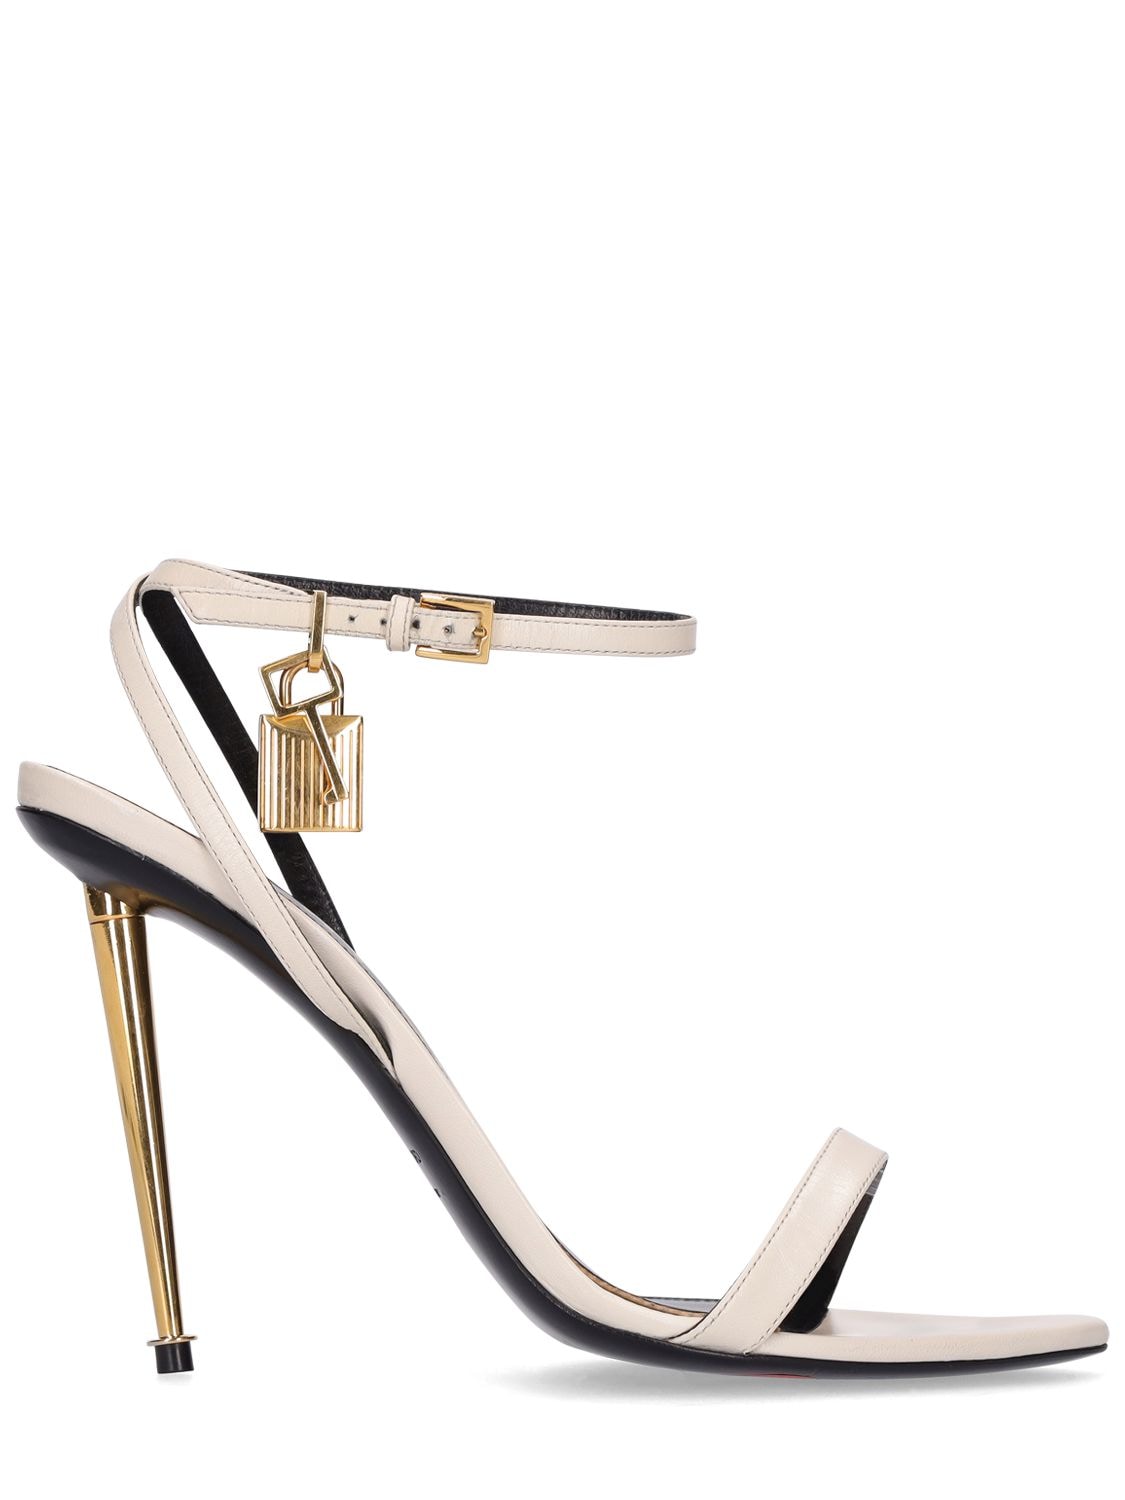 TOM FORD 105mm Padlock Leather Sandals